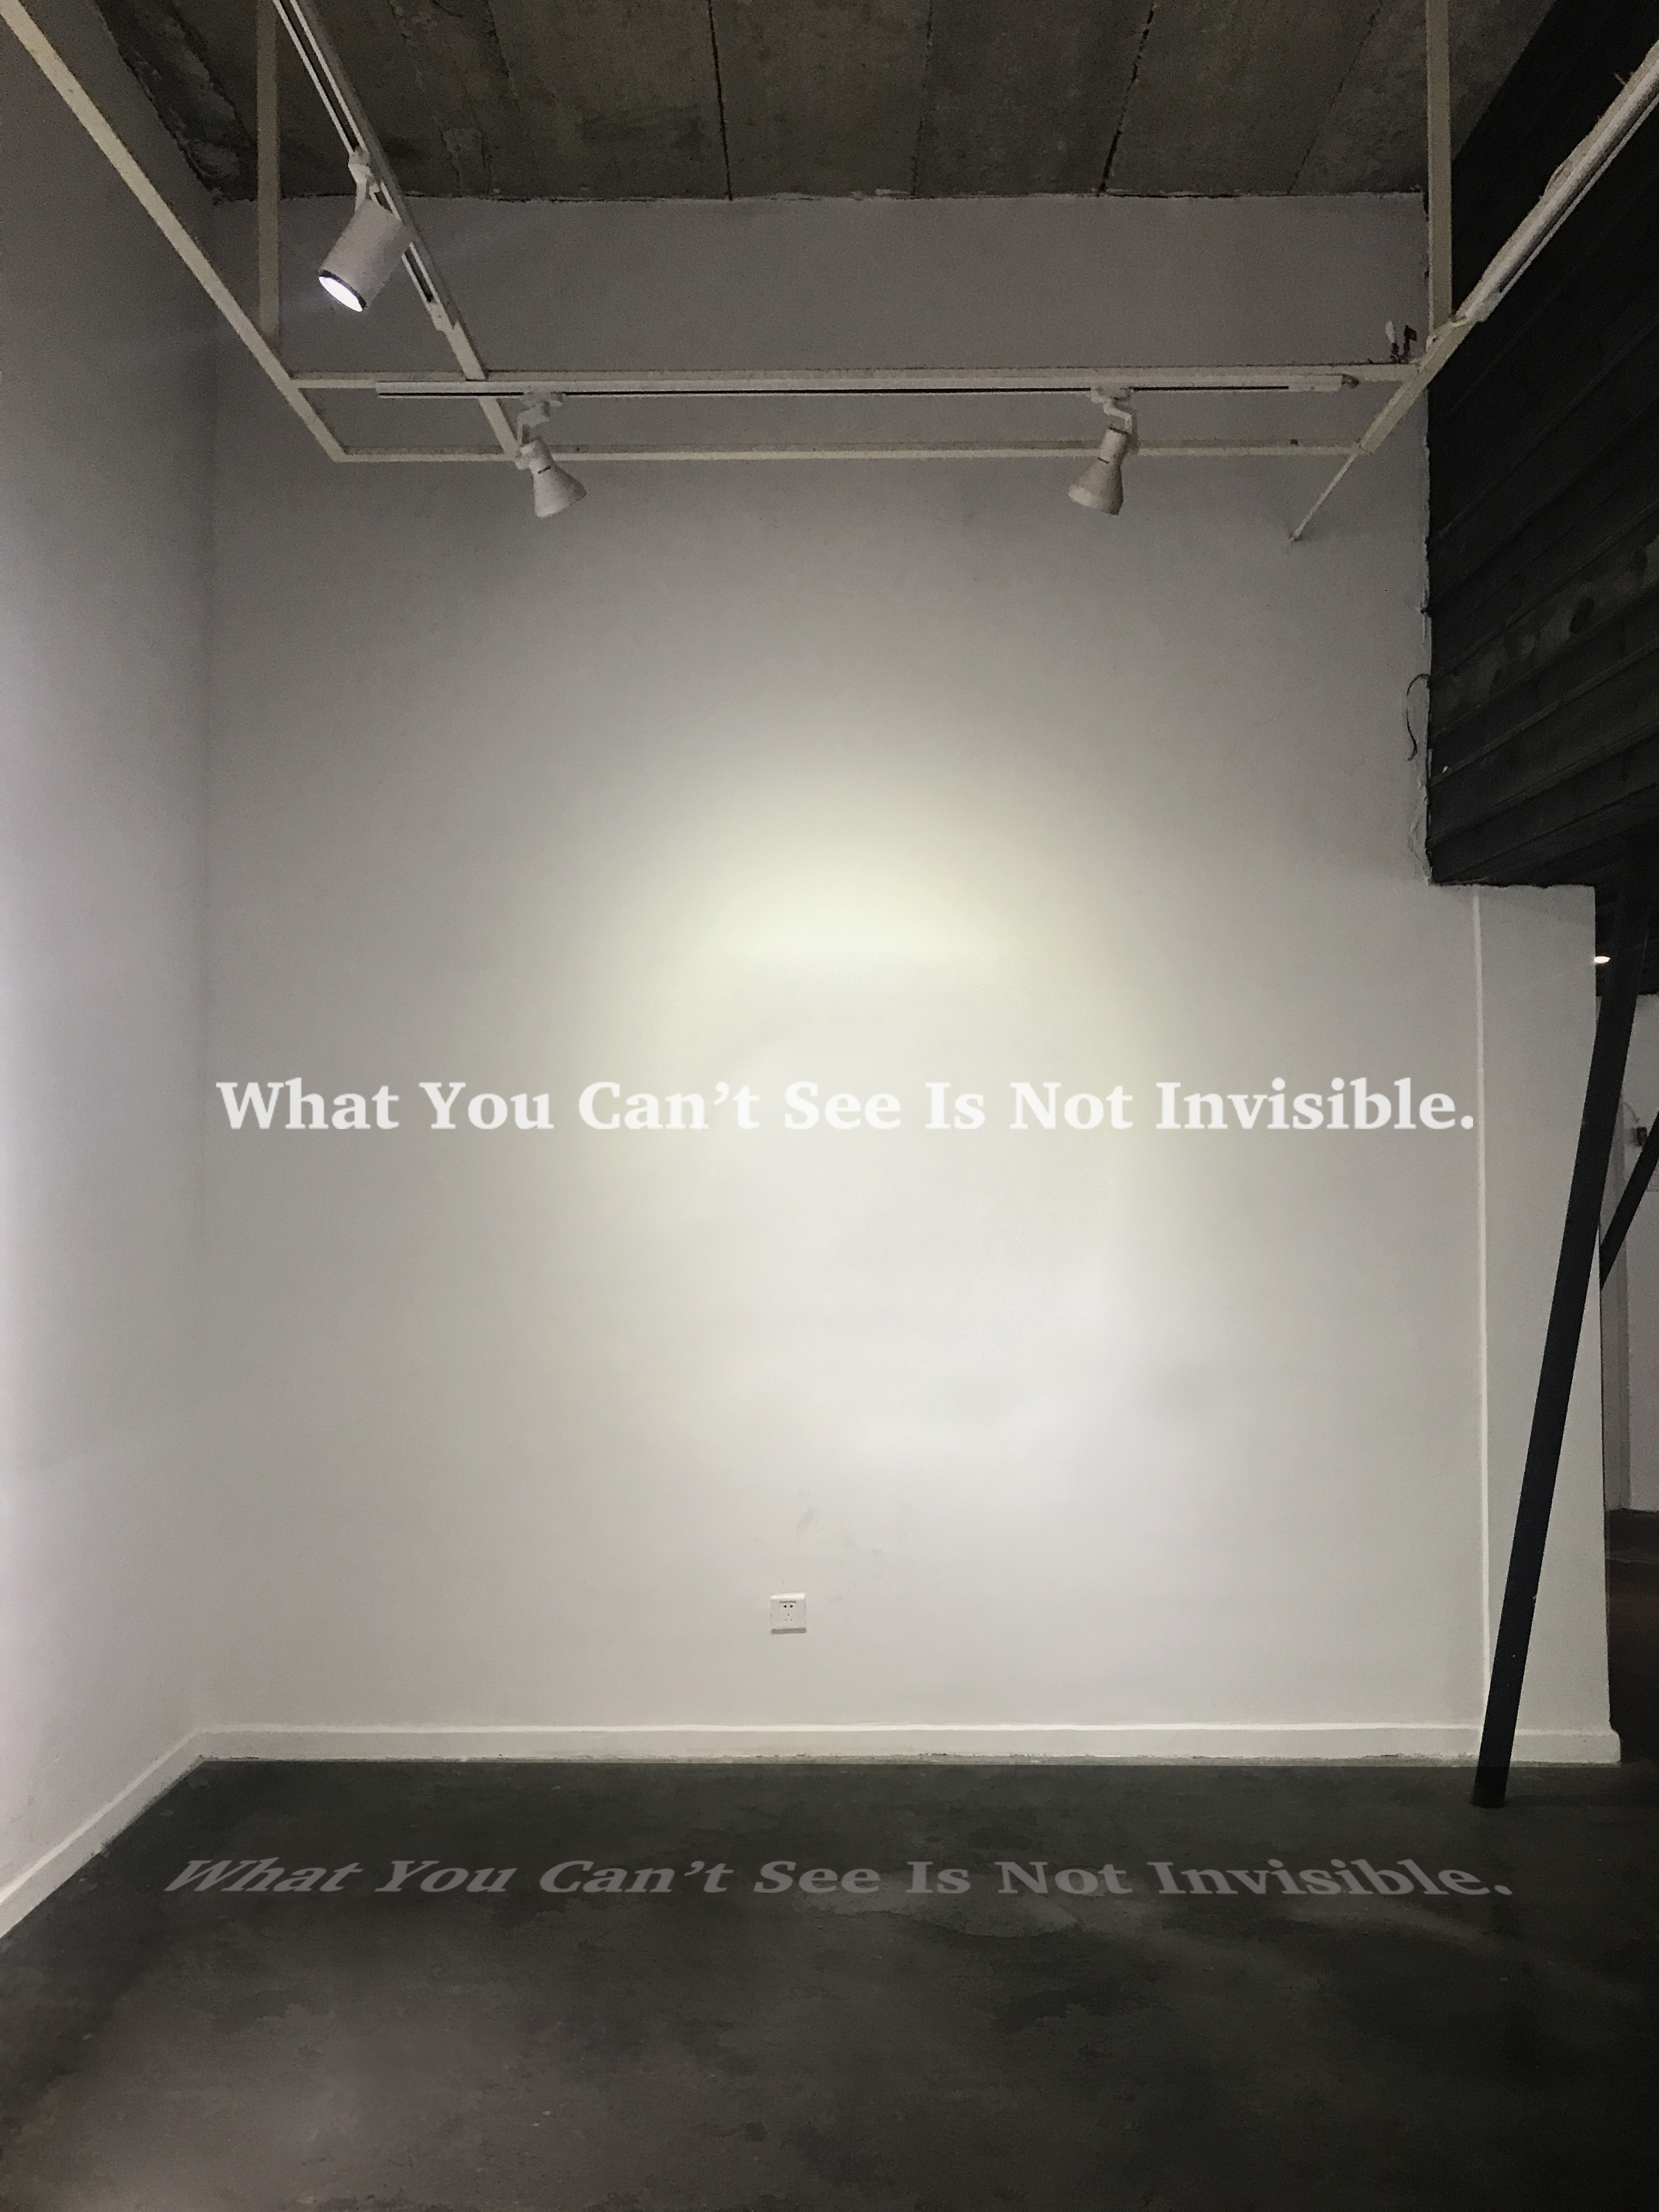 What You Can’t See Is Not Invisible